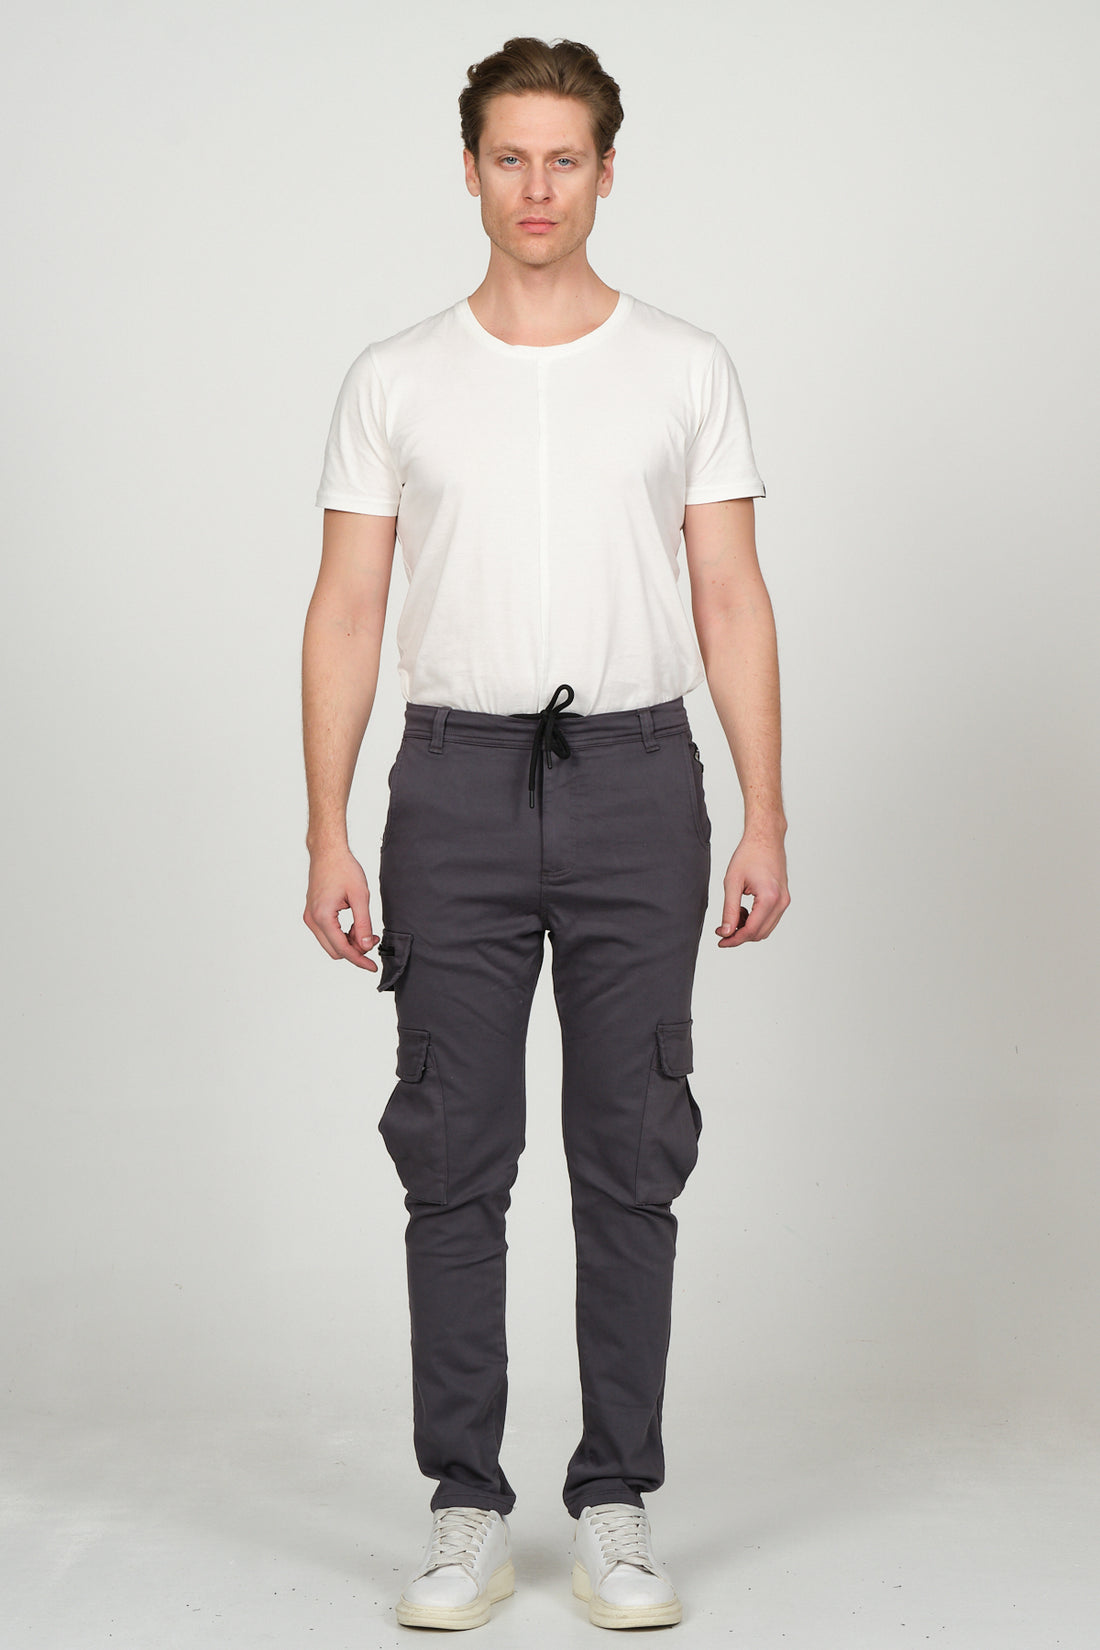 2667-anthracite Jogger Pants - Ron Tomson